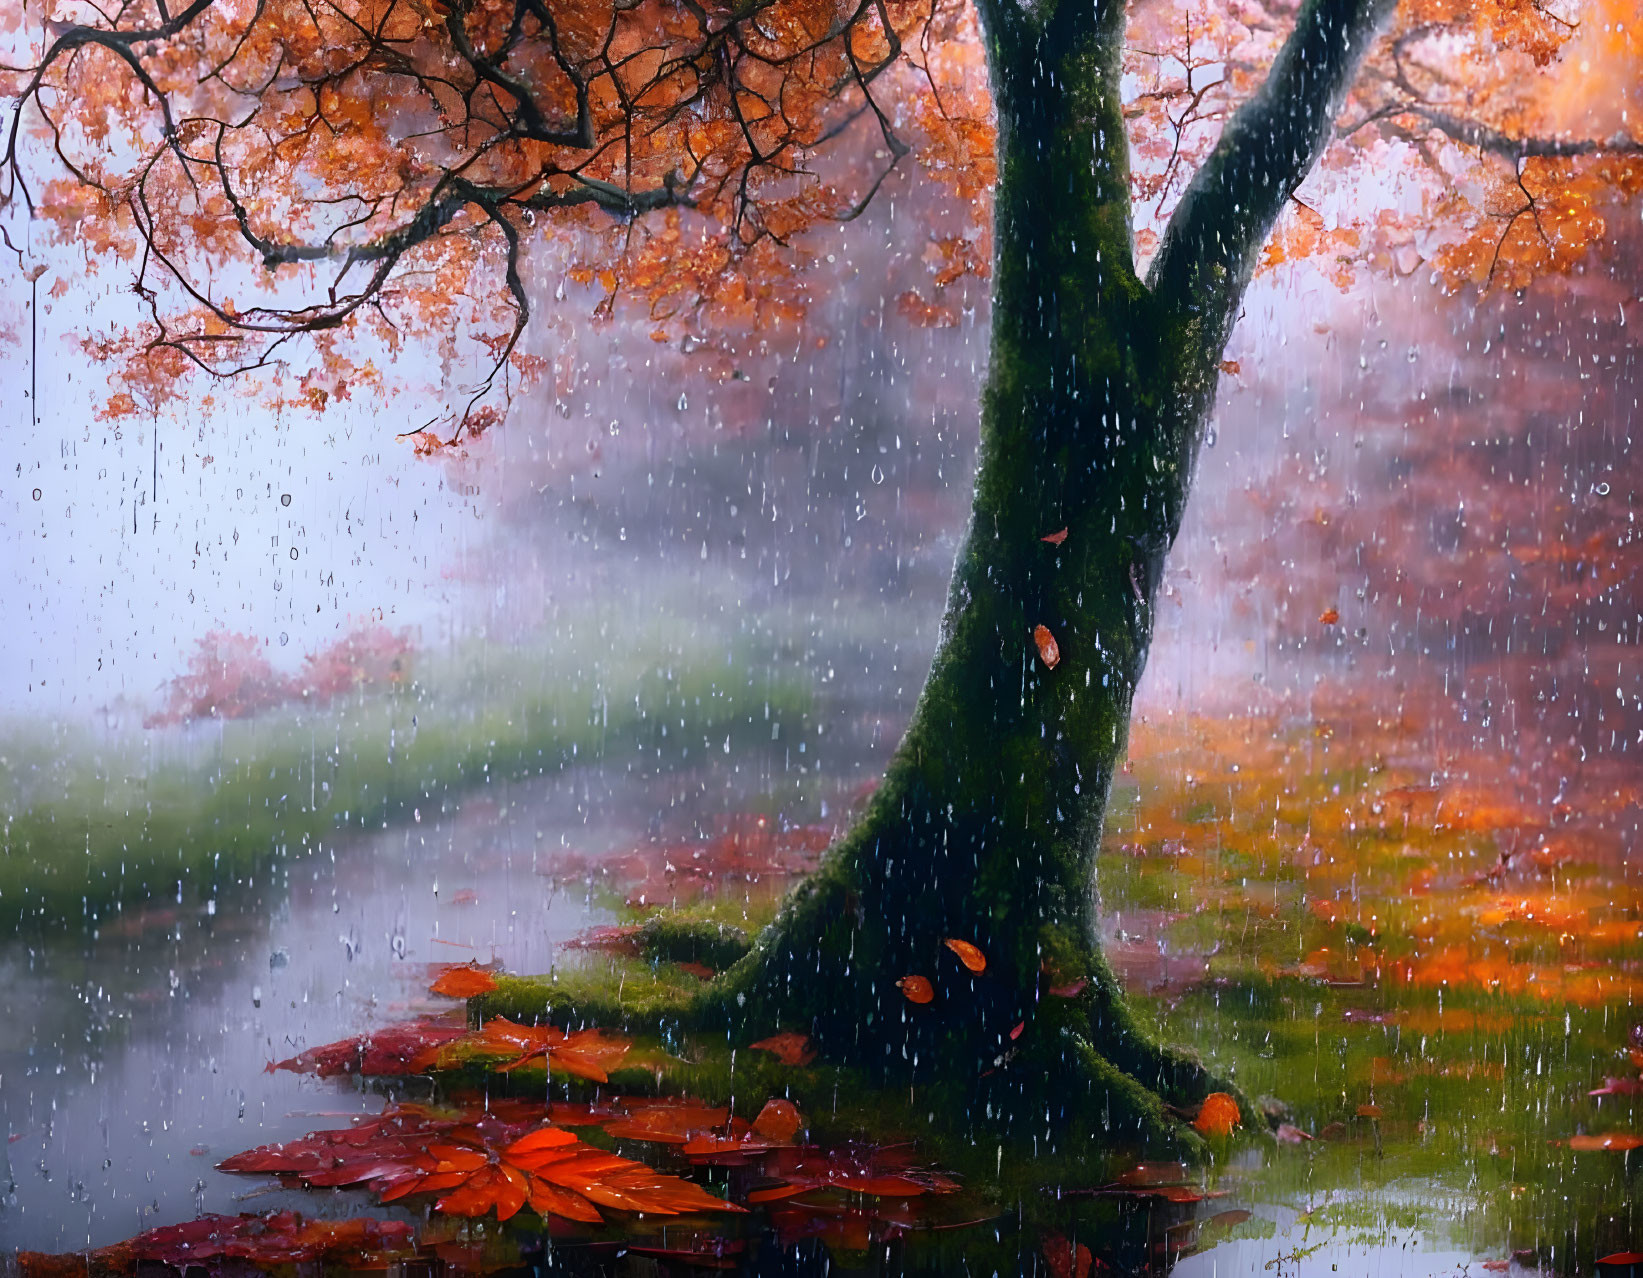 a rainy day in autumn